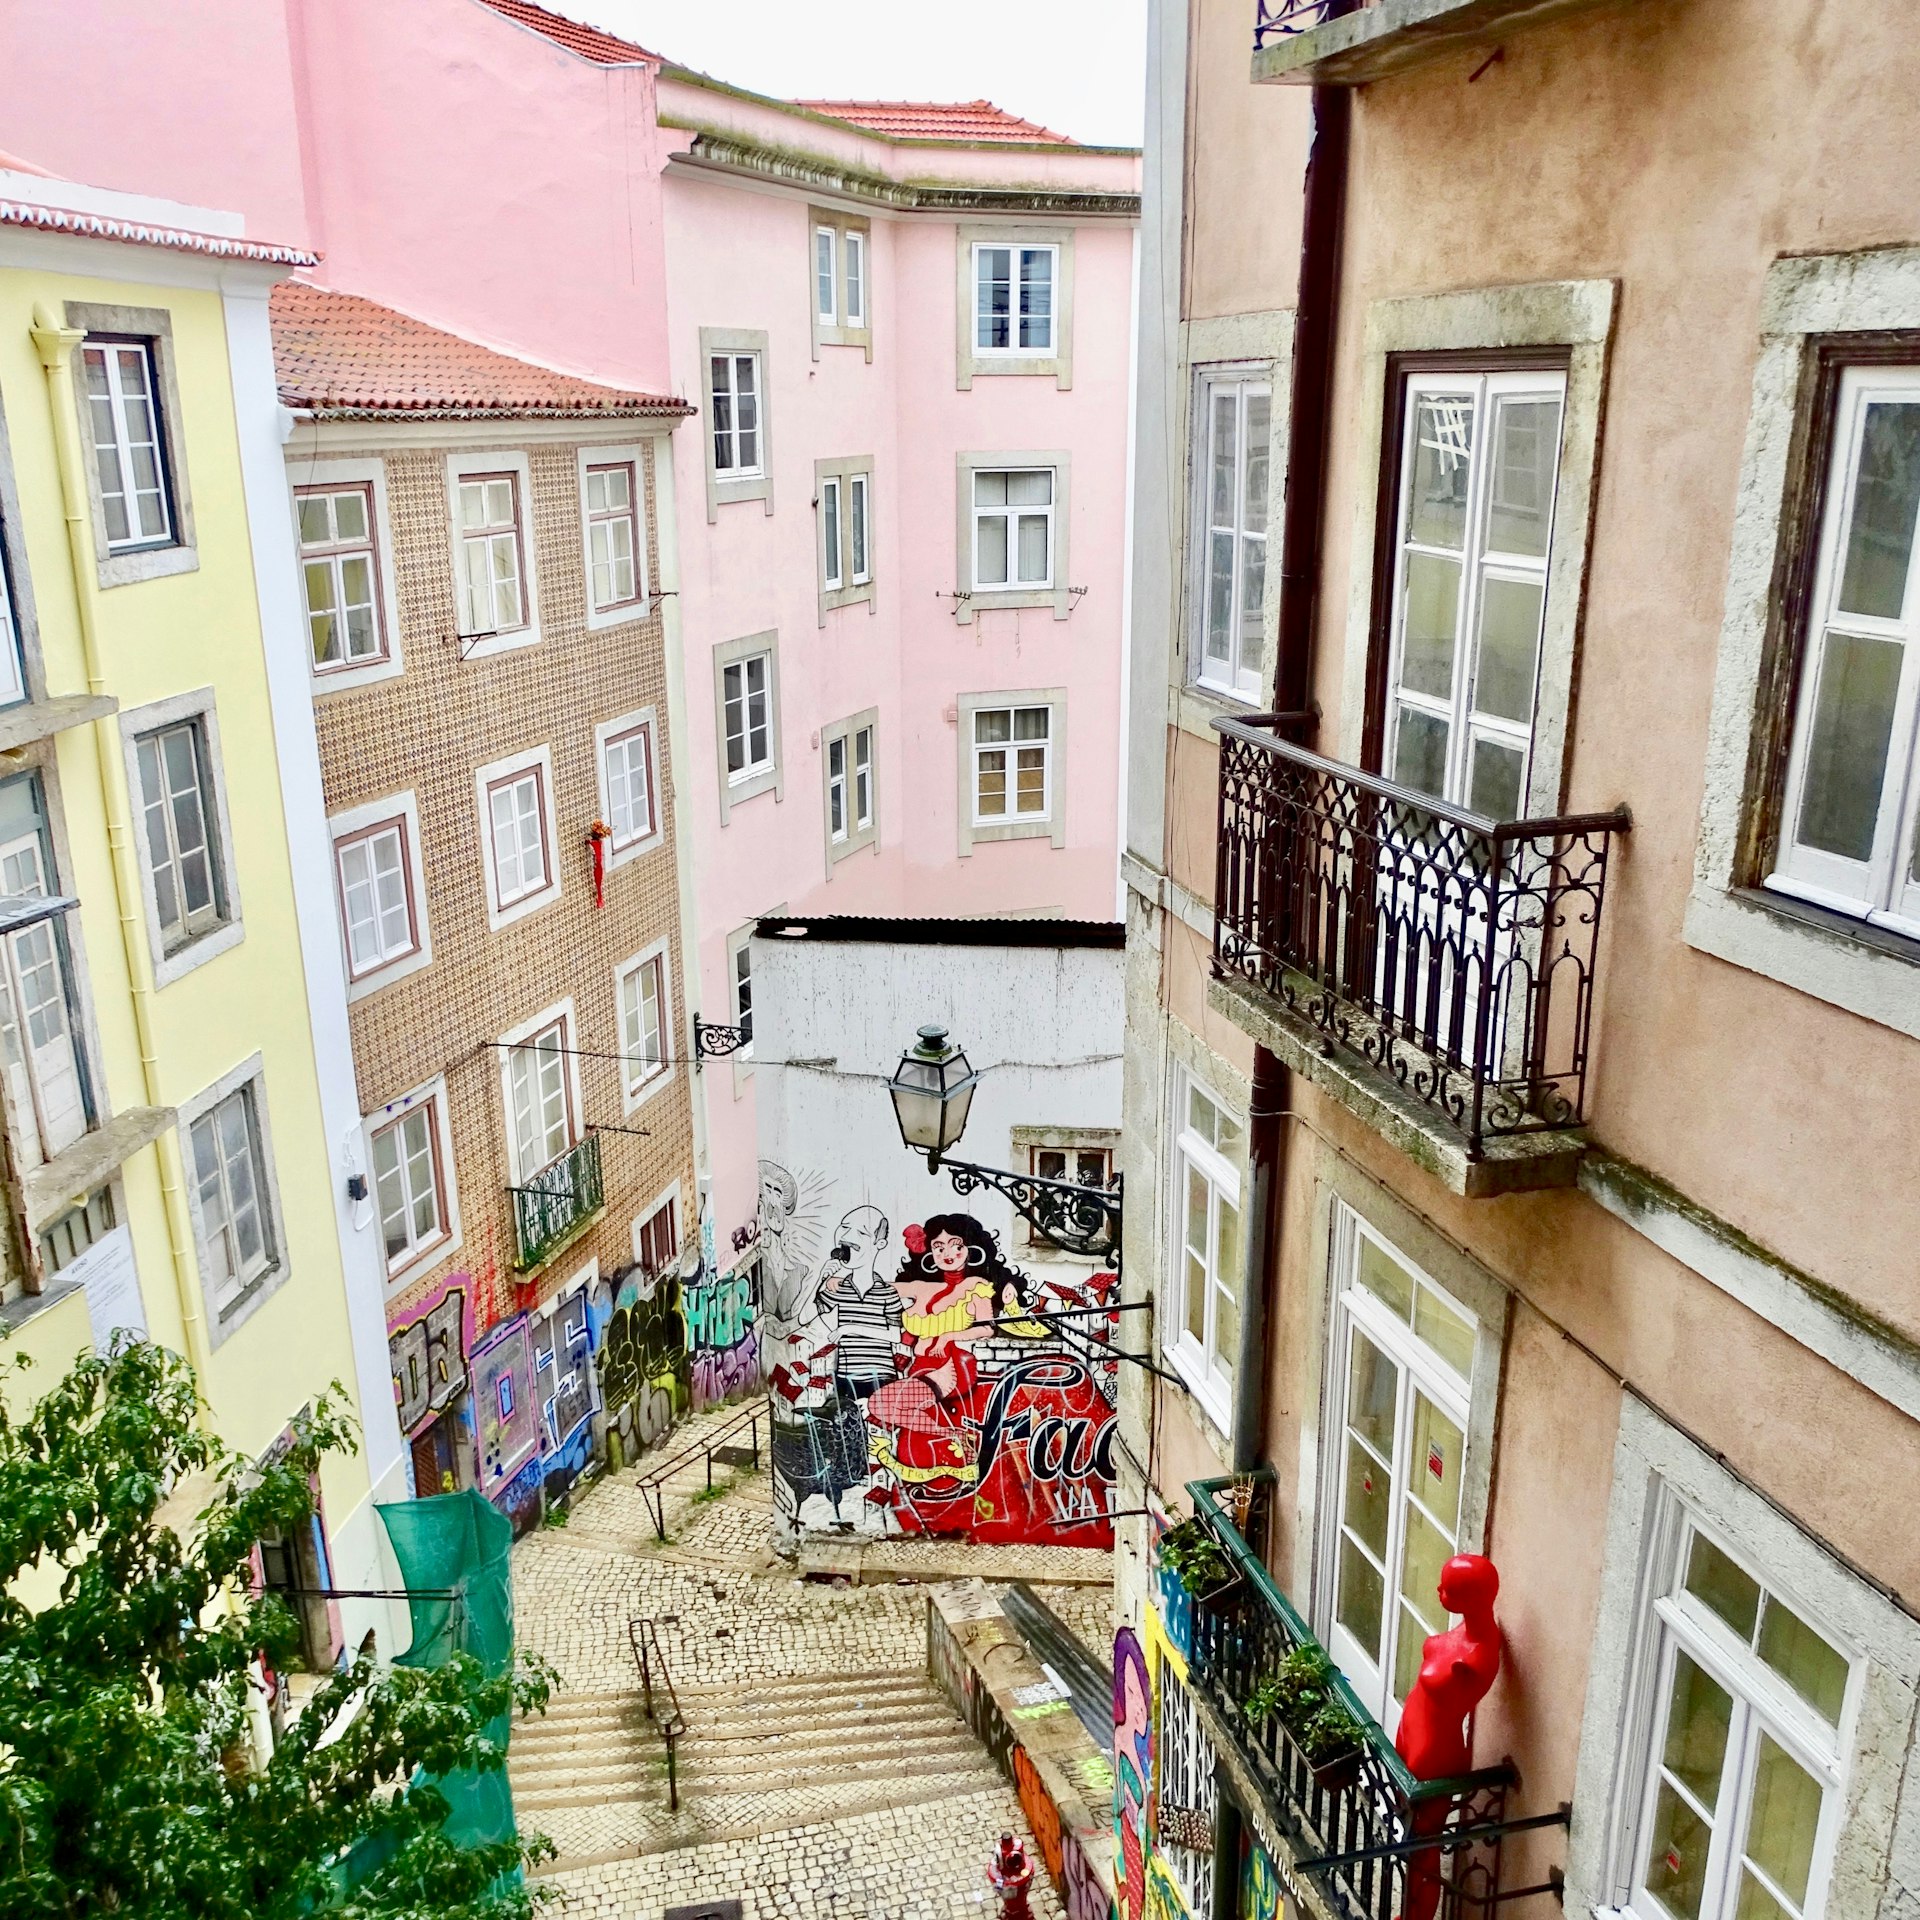 A view down a Lisbon alleyway with colourful buildings and a mural on the far wall.